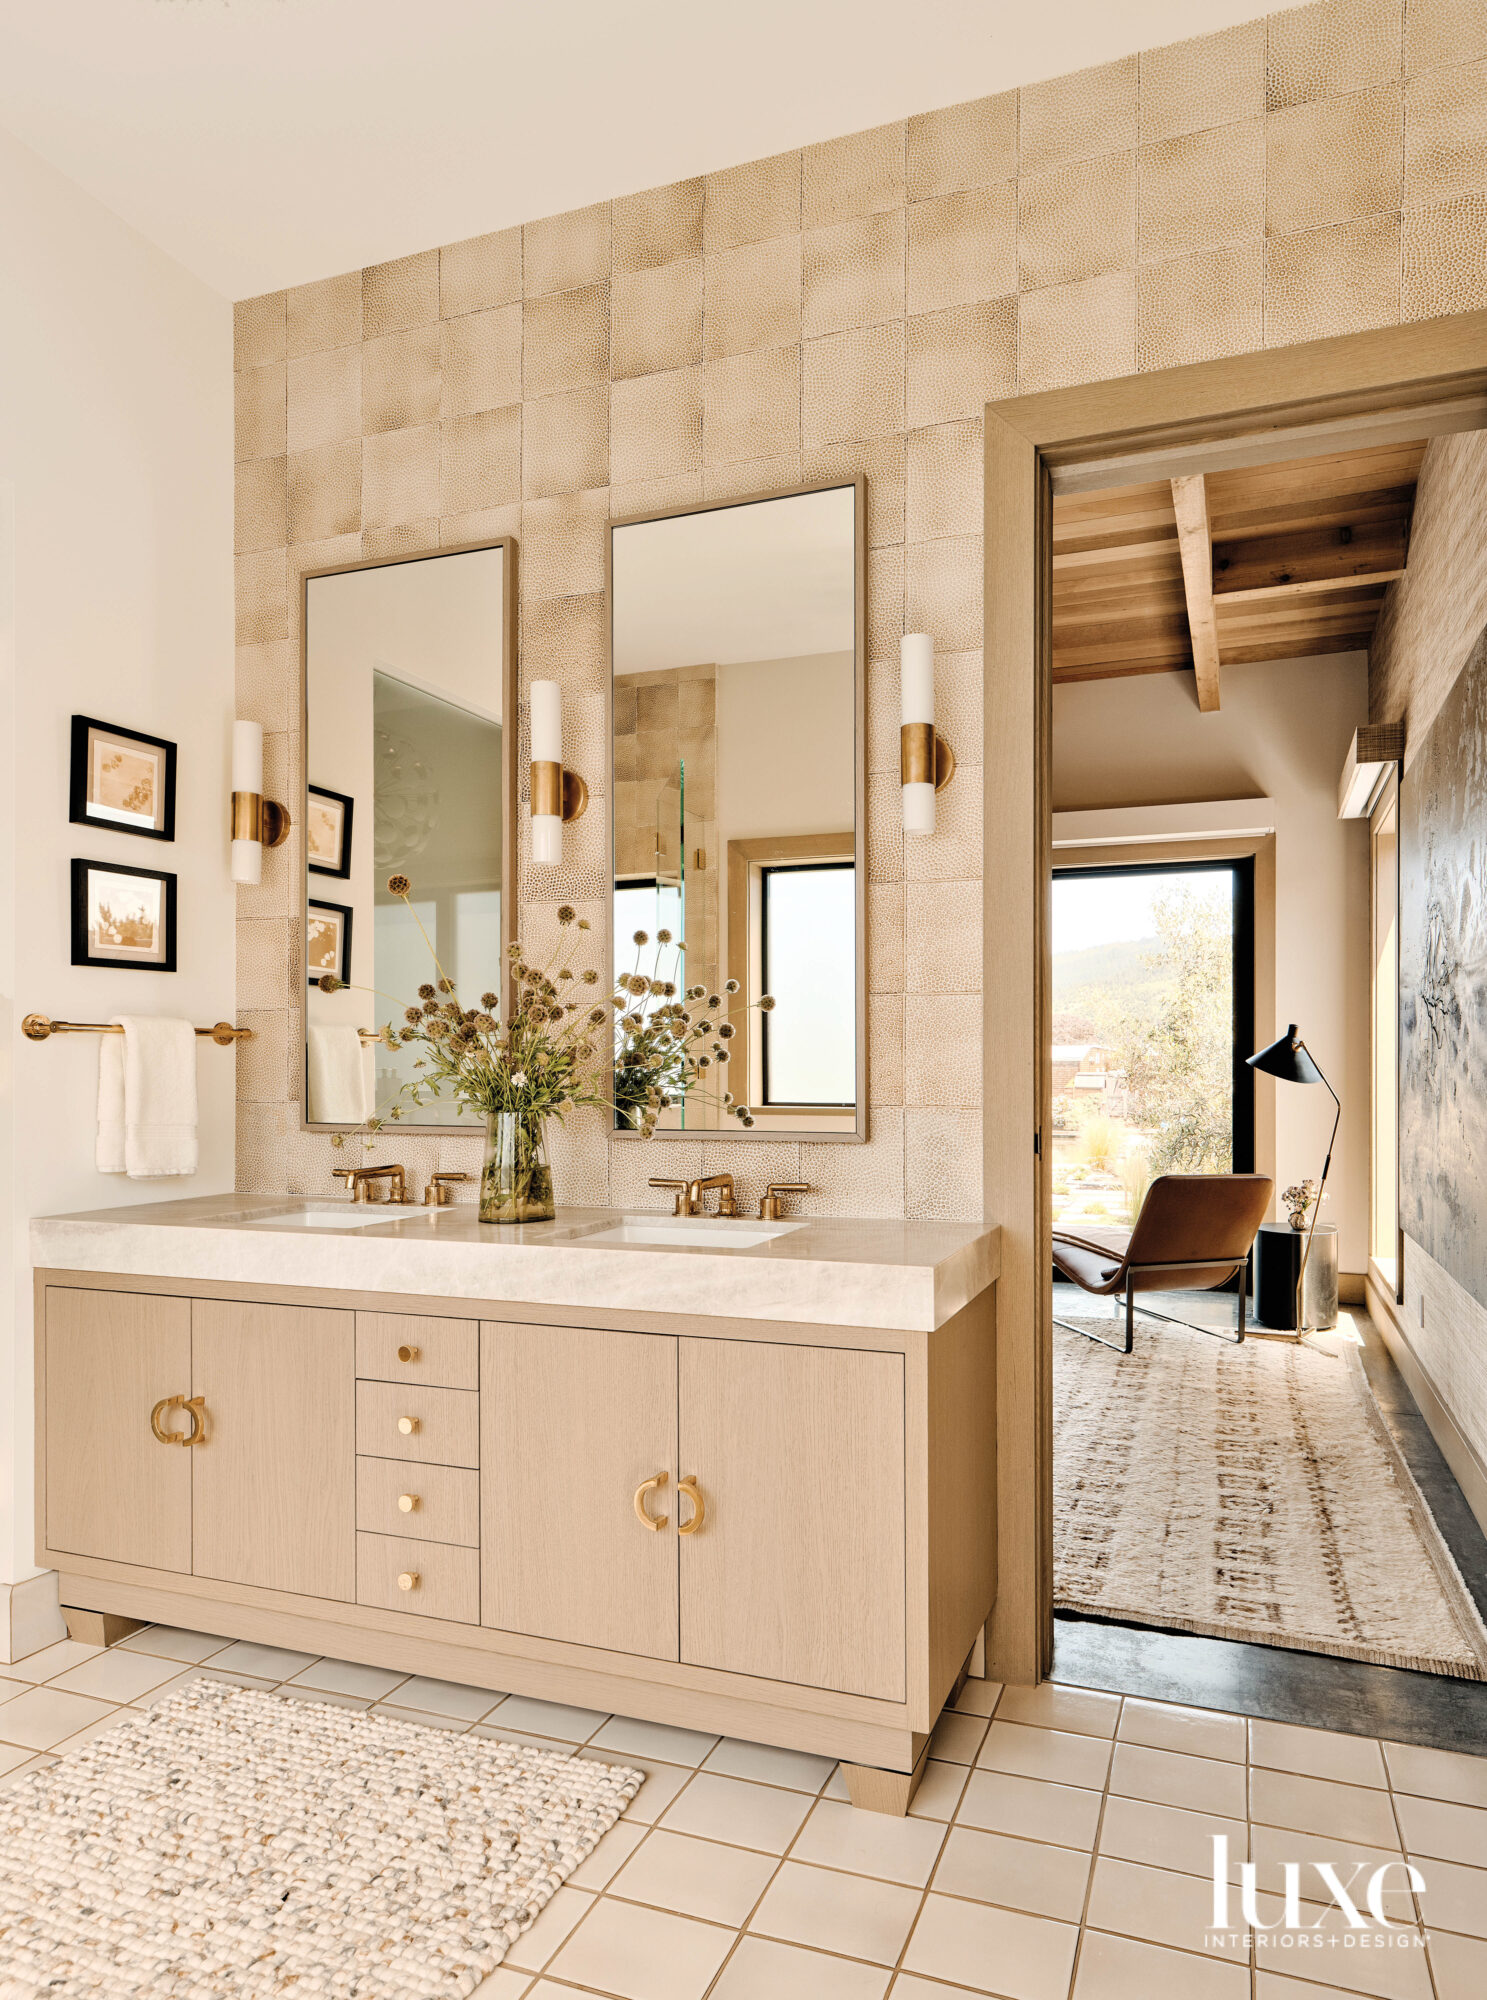 The primary bathroom has rustic tile and light-colored cabinets.